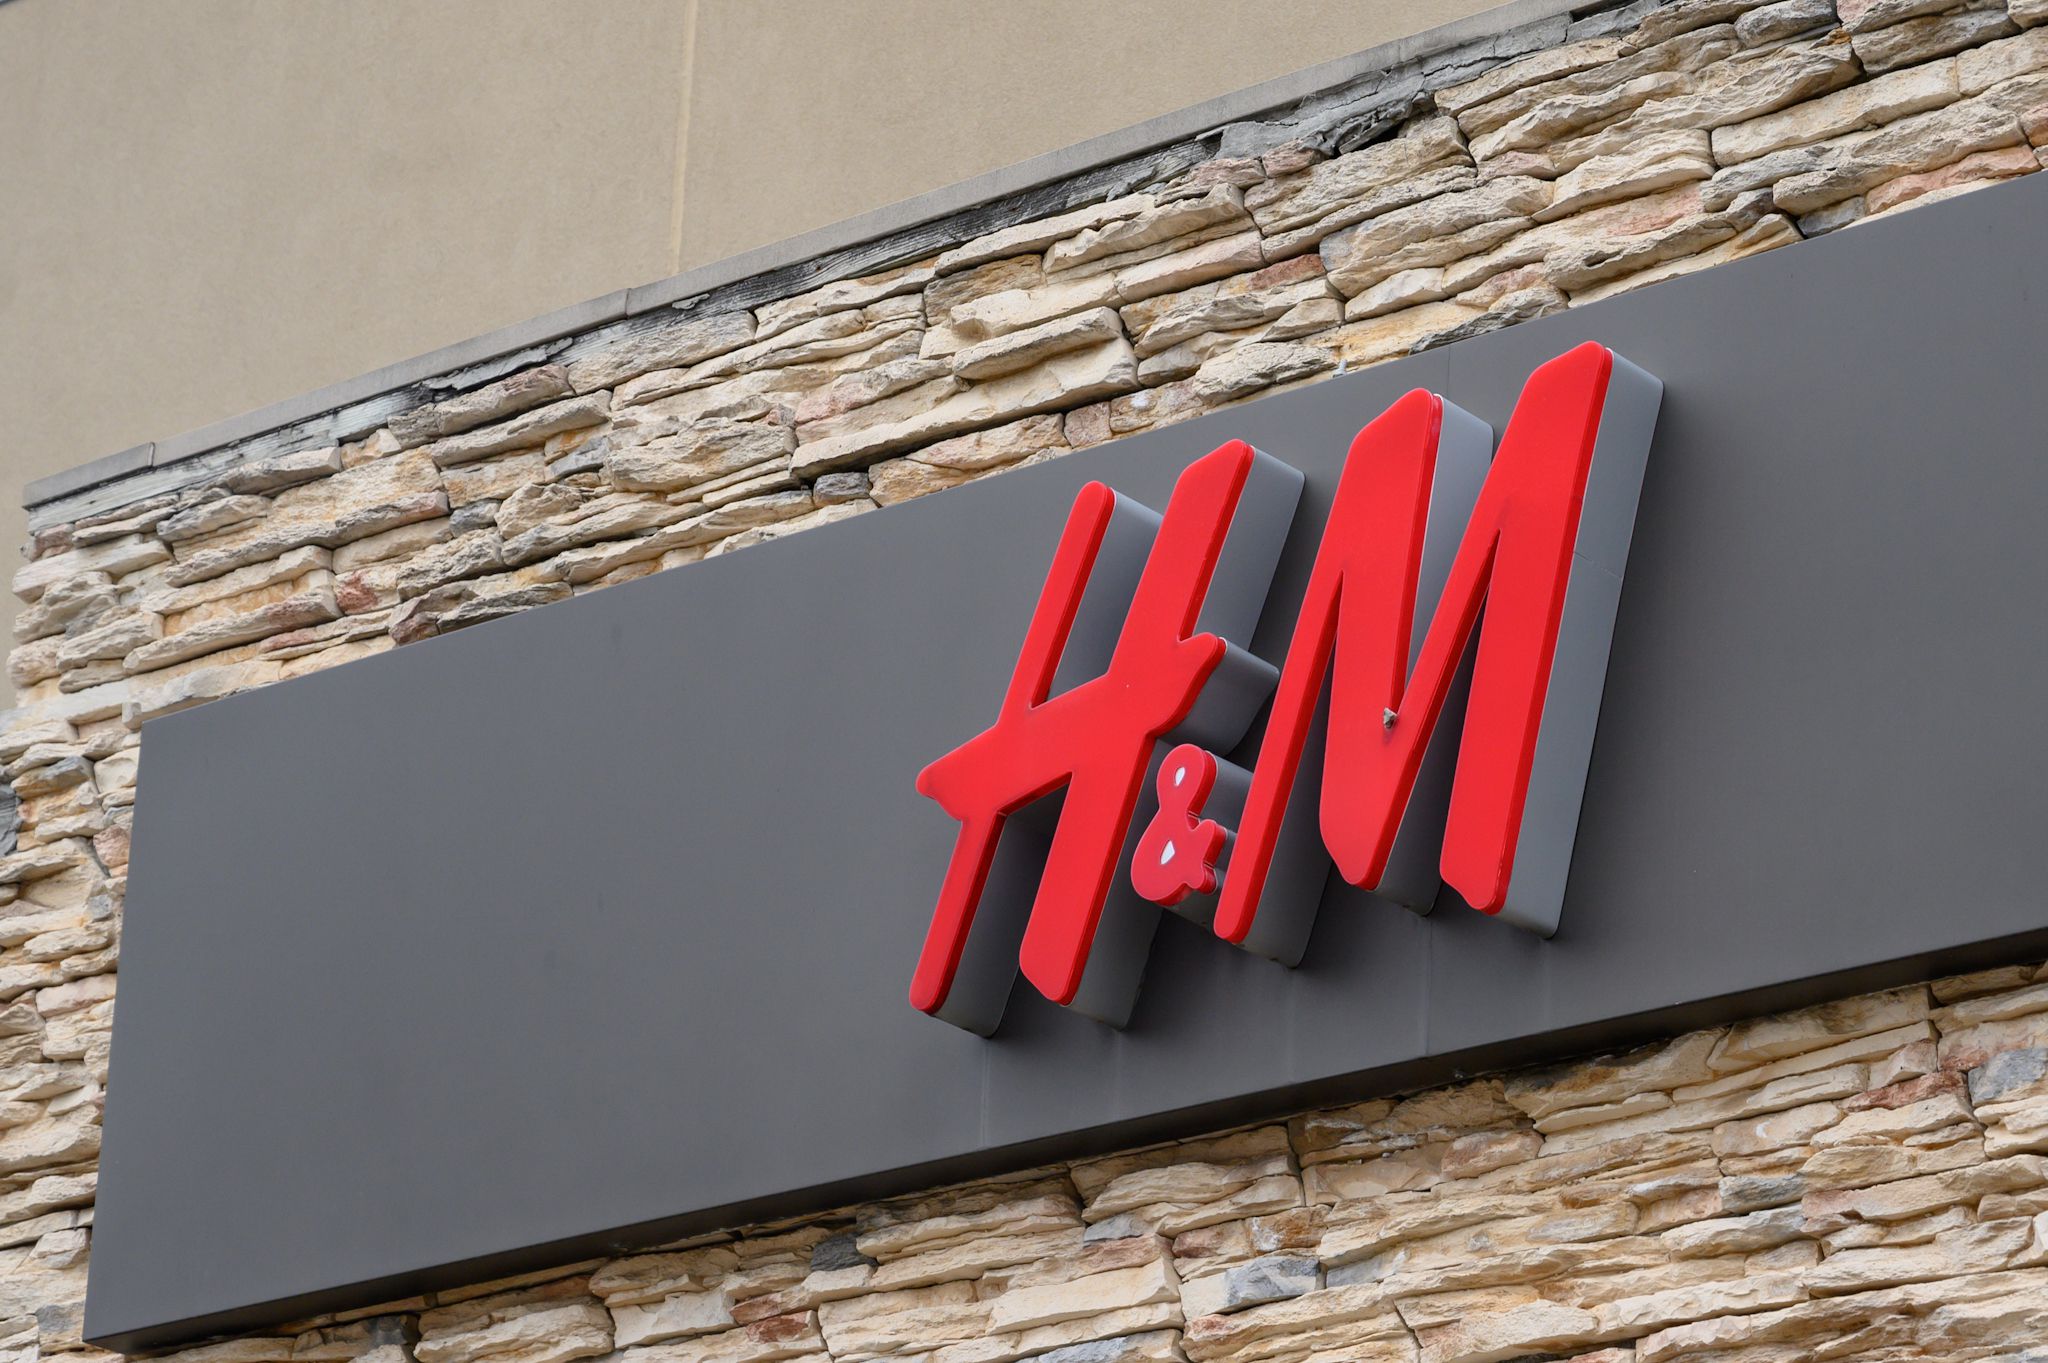 H&M to close 250 stores in 2021 as more shopping moves online